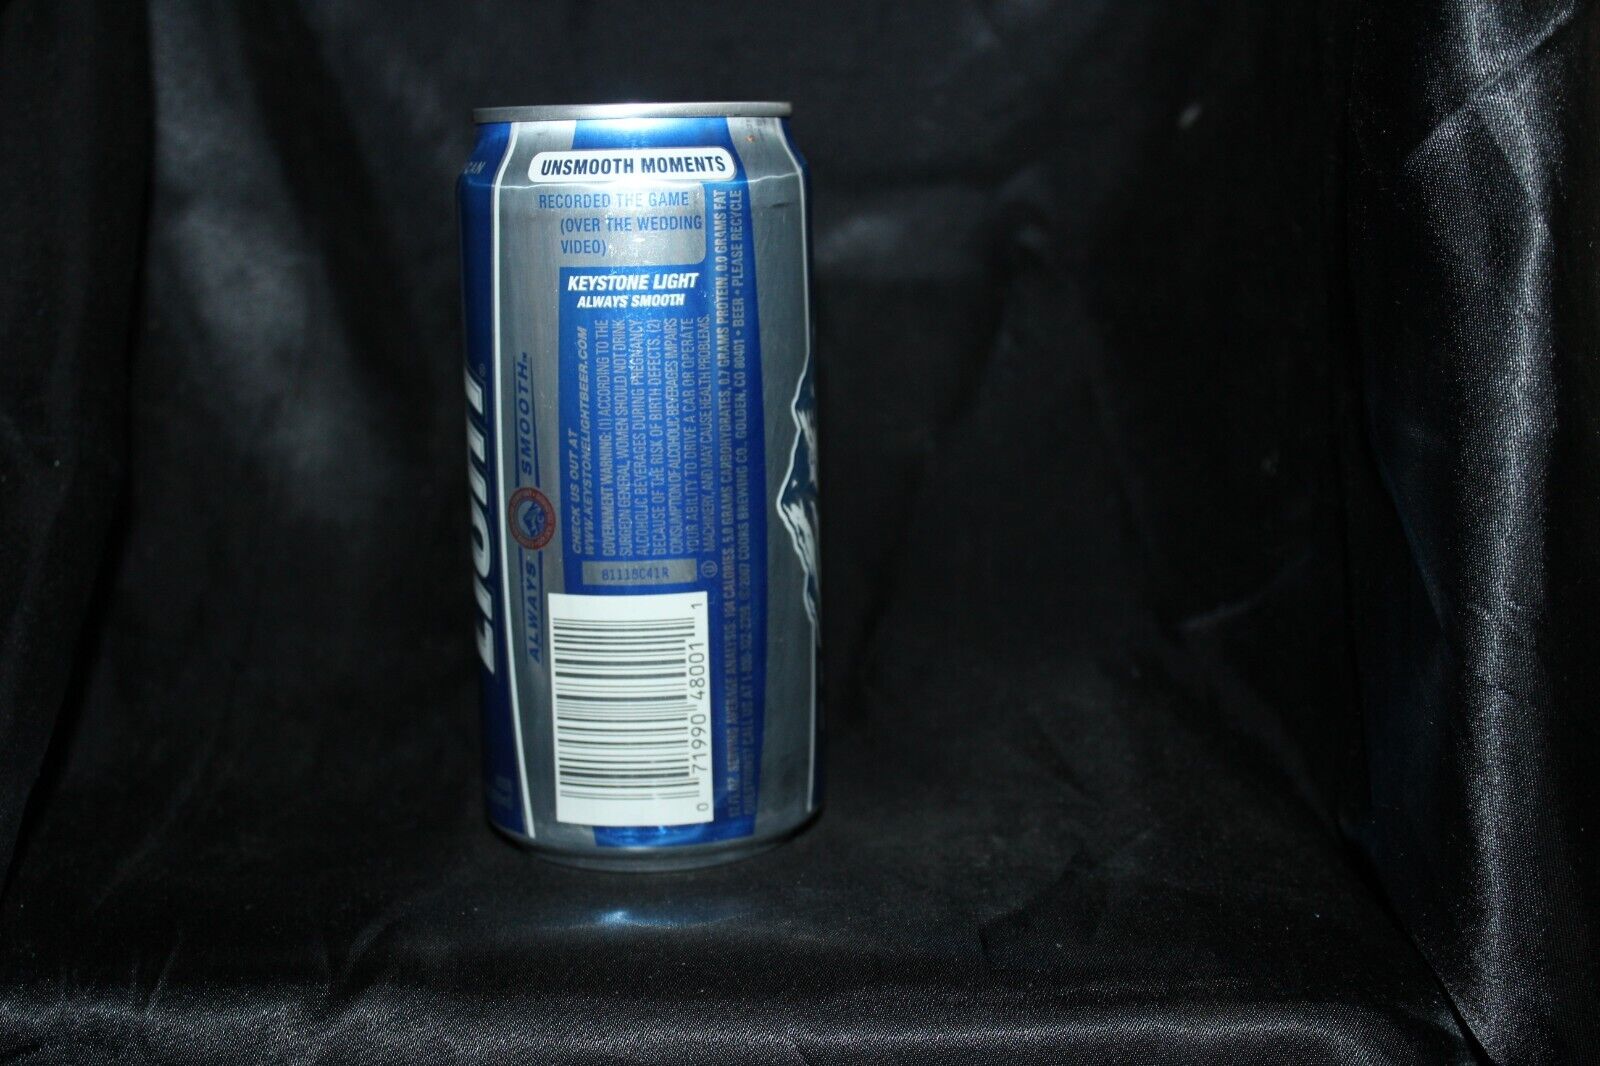 Colorado 12oz - KEYSTONE LIGHT - Unsmooth Moment - 2007 - RECORDED THE GAME (OVE